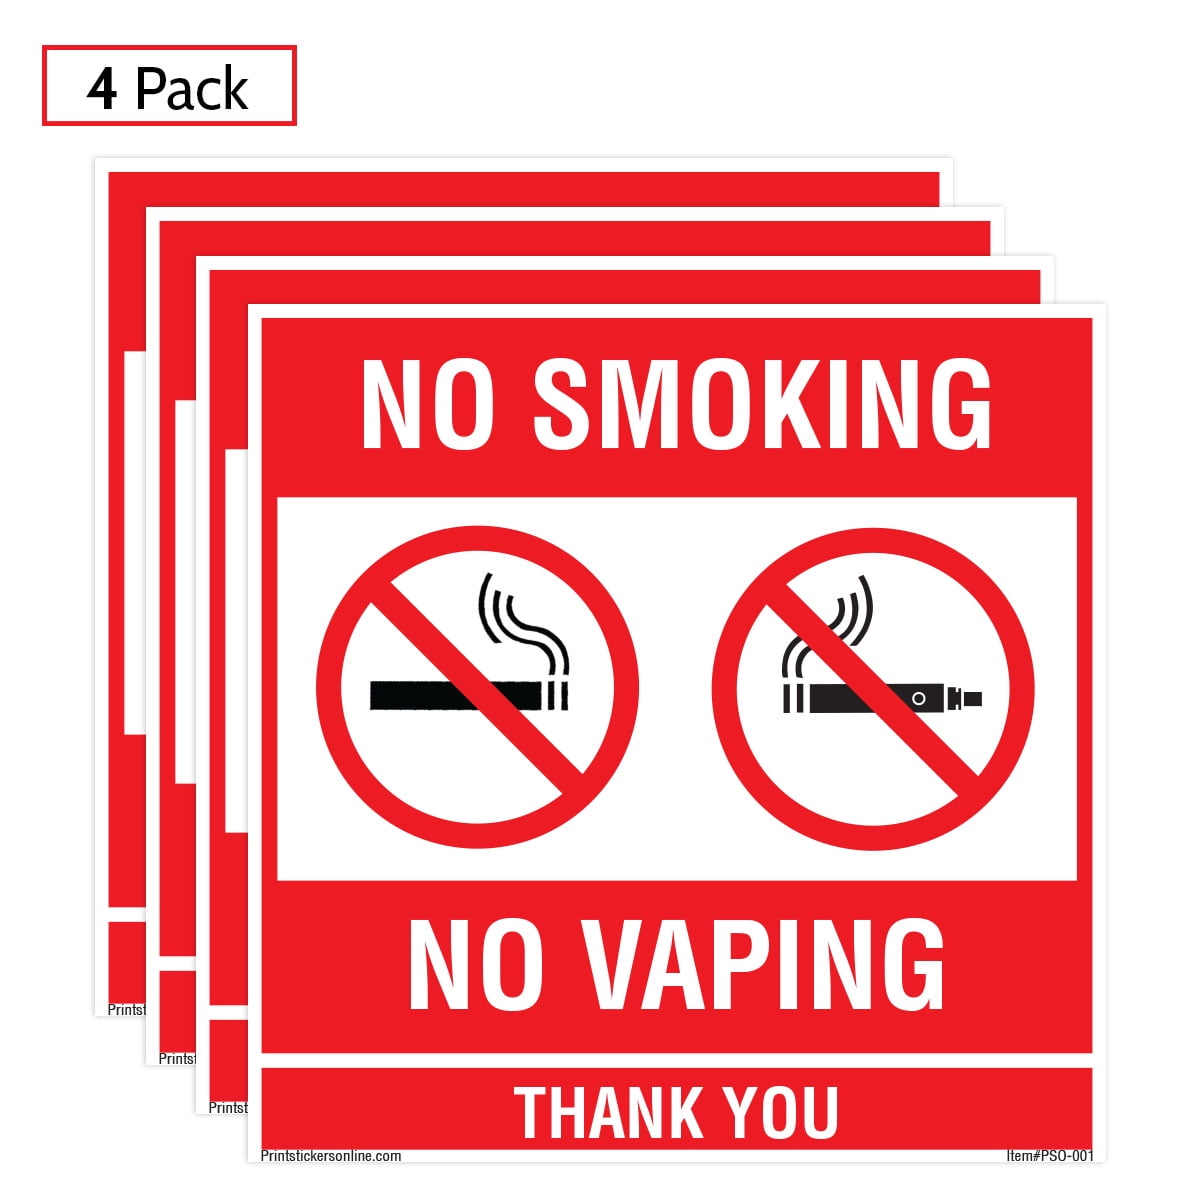 6 X 6-4 Mil Premium Vinyl 4 Pack No Smoking Self Adhesive Vinyl Decal Sign Made in USA UV Protected and Weatherproof Visual 52 